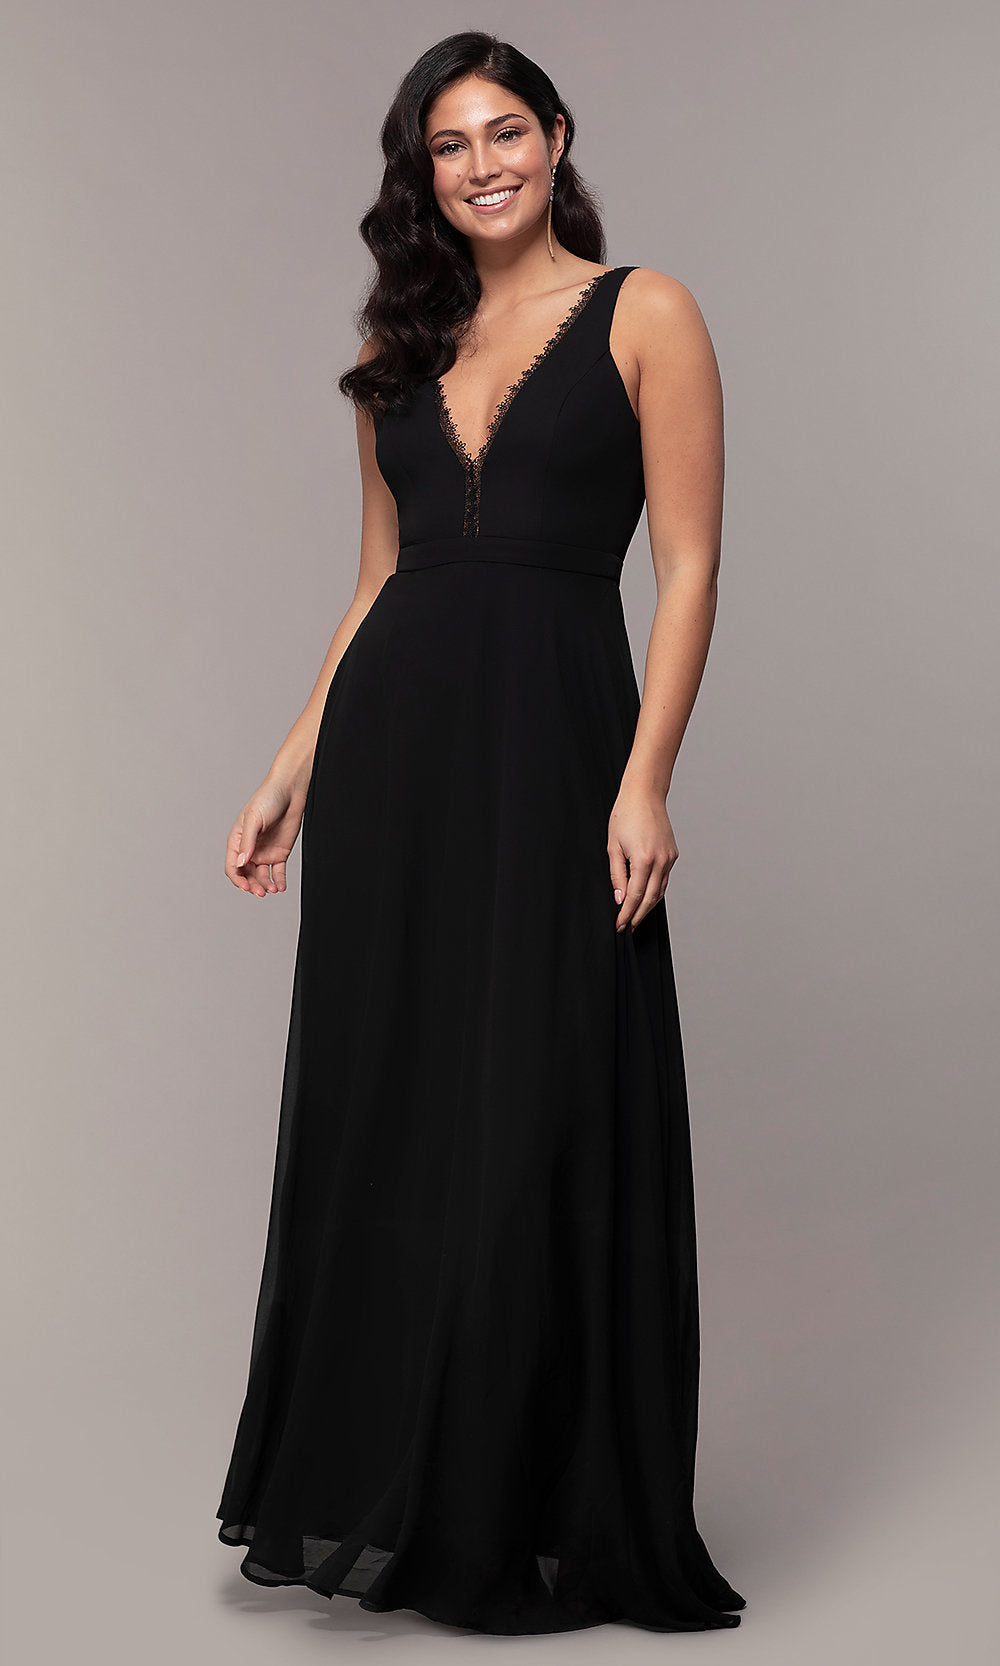 Black Long Black Formal V-Neck Evening Gown with Lace Trim